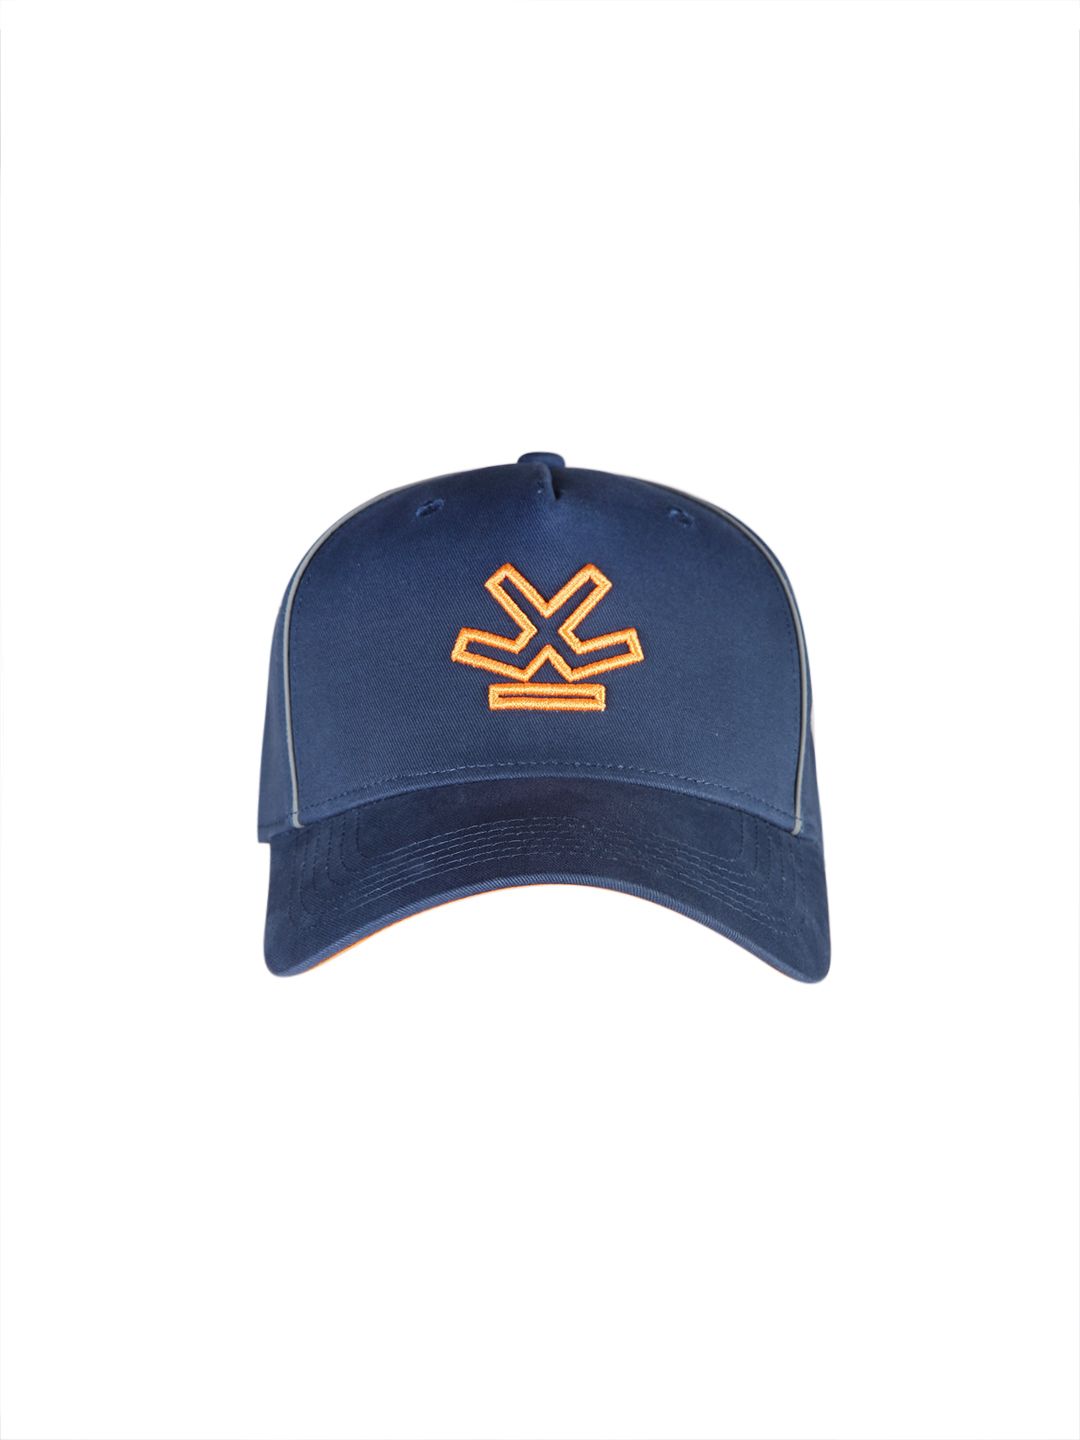 WROGN Unisex Navy Blue Embroidered Baseball Cap Price in India